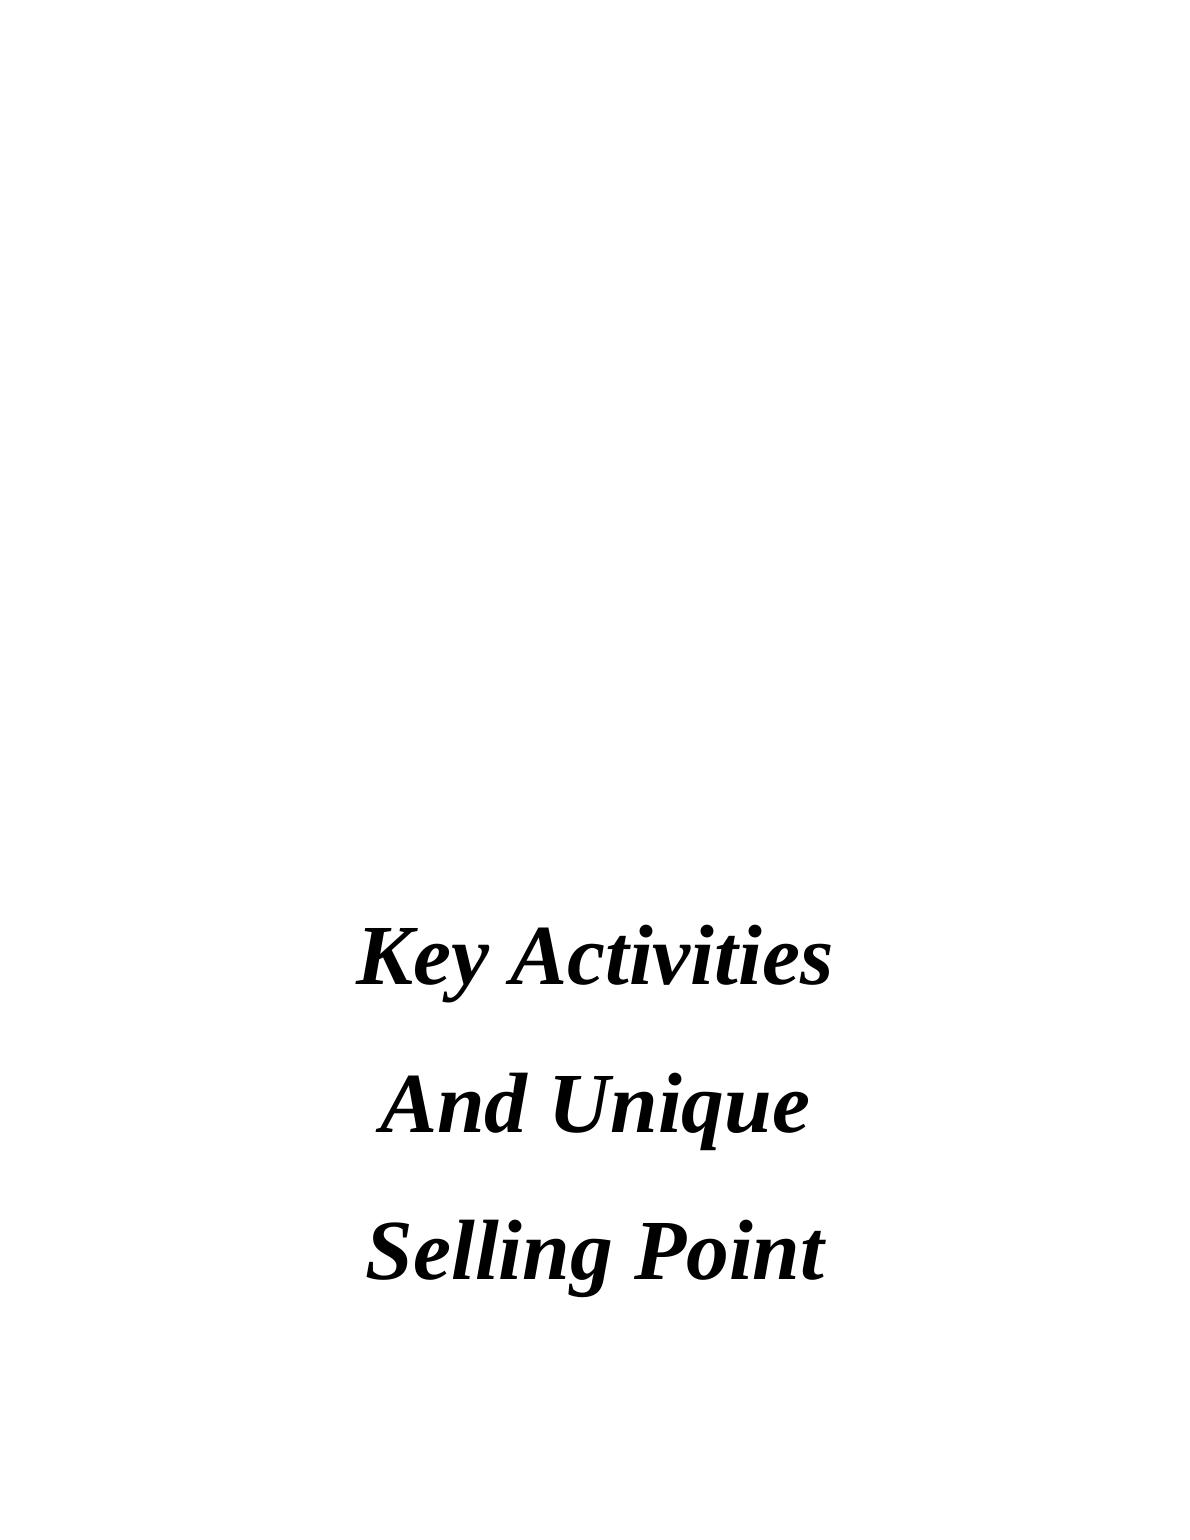 Key Activities and Unique Selling Point_1